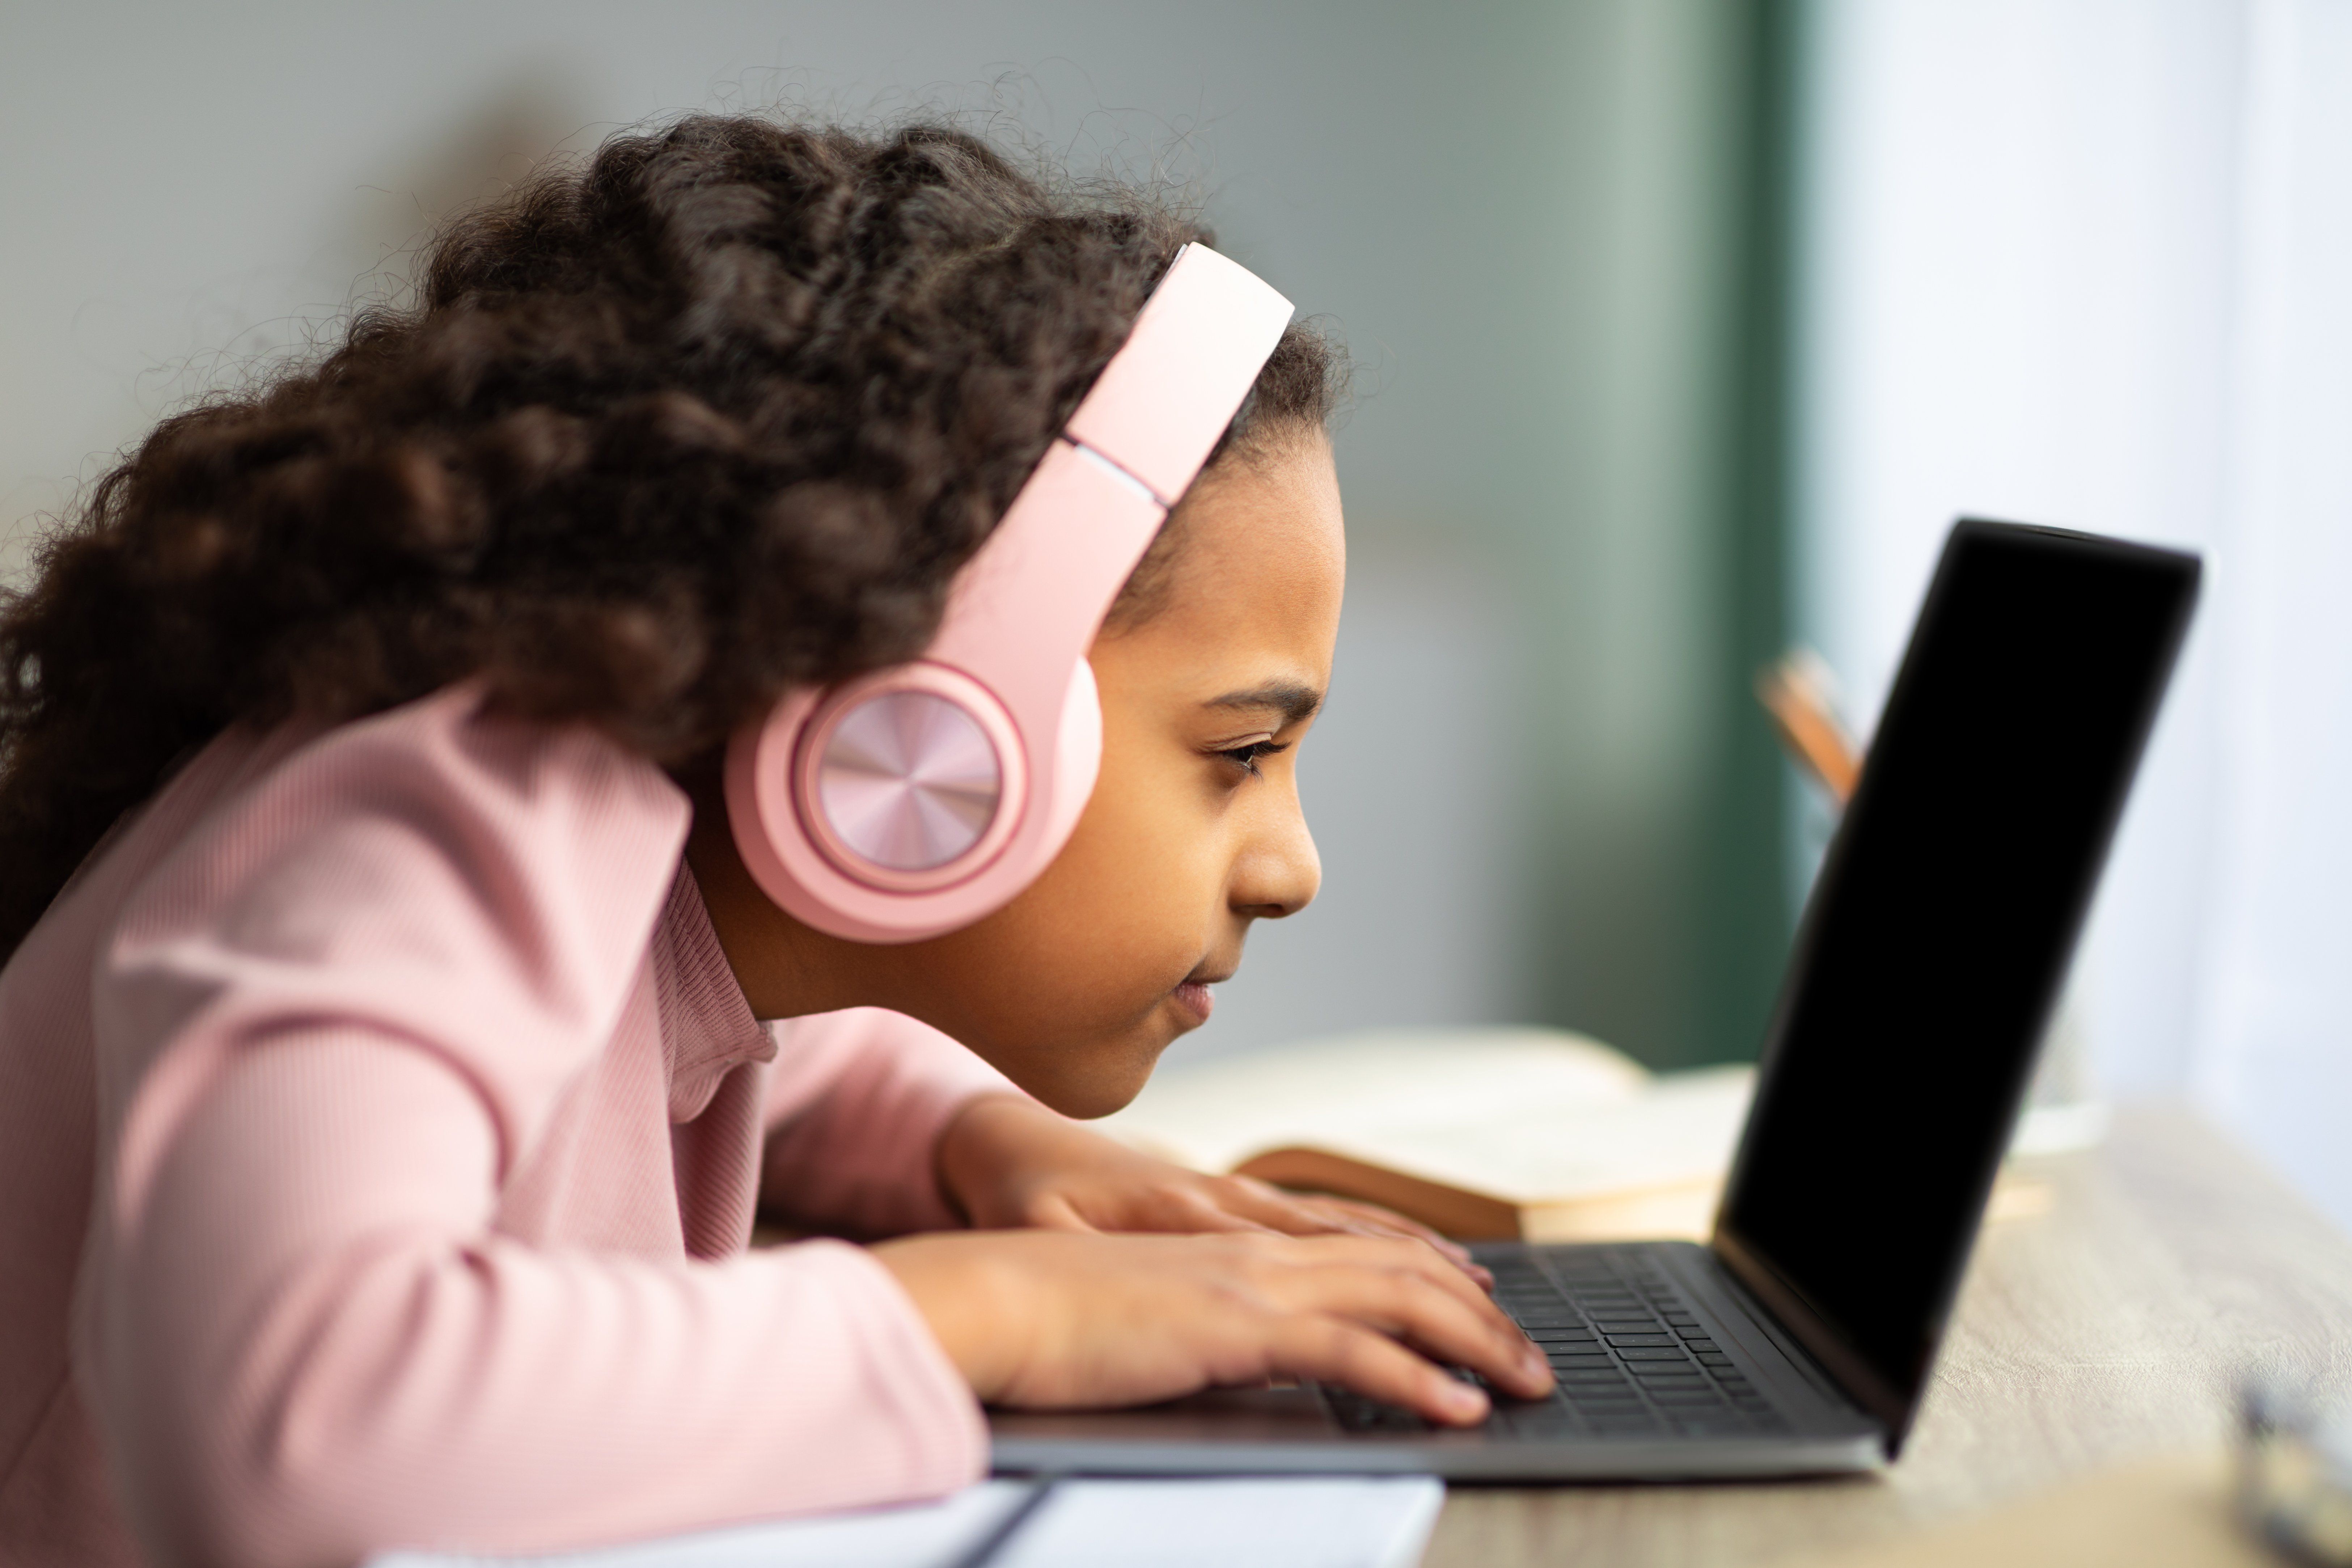 How Does Increased Screen Time Affect Children's Eyes?